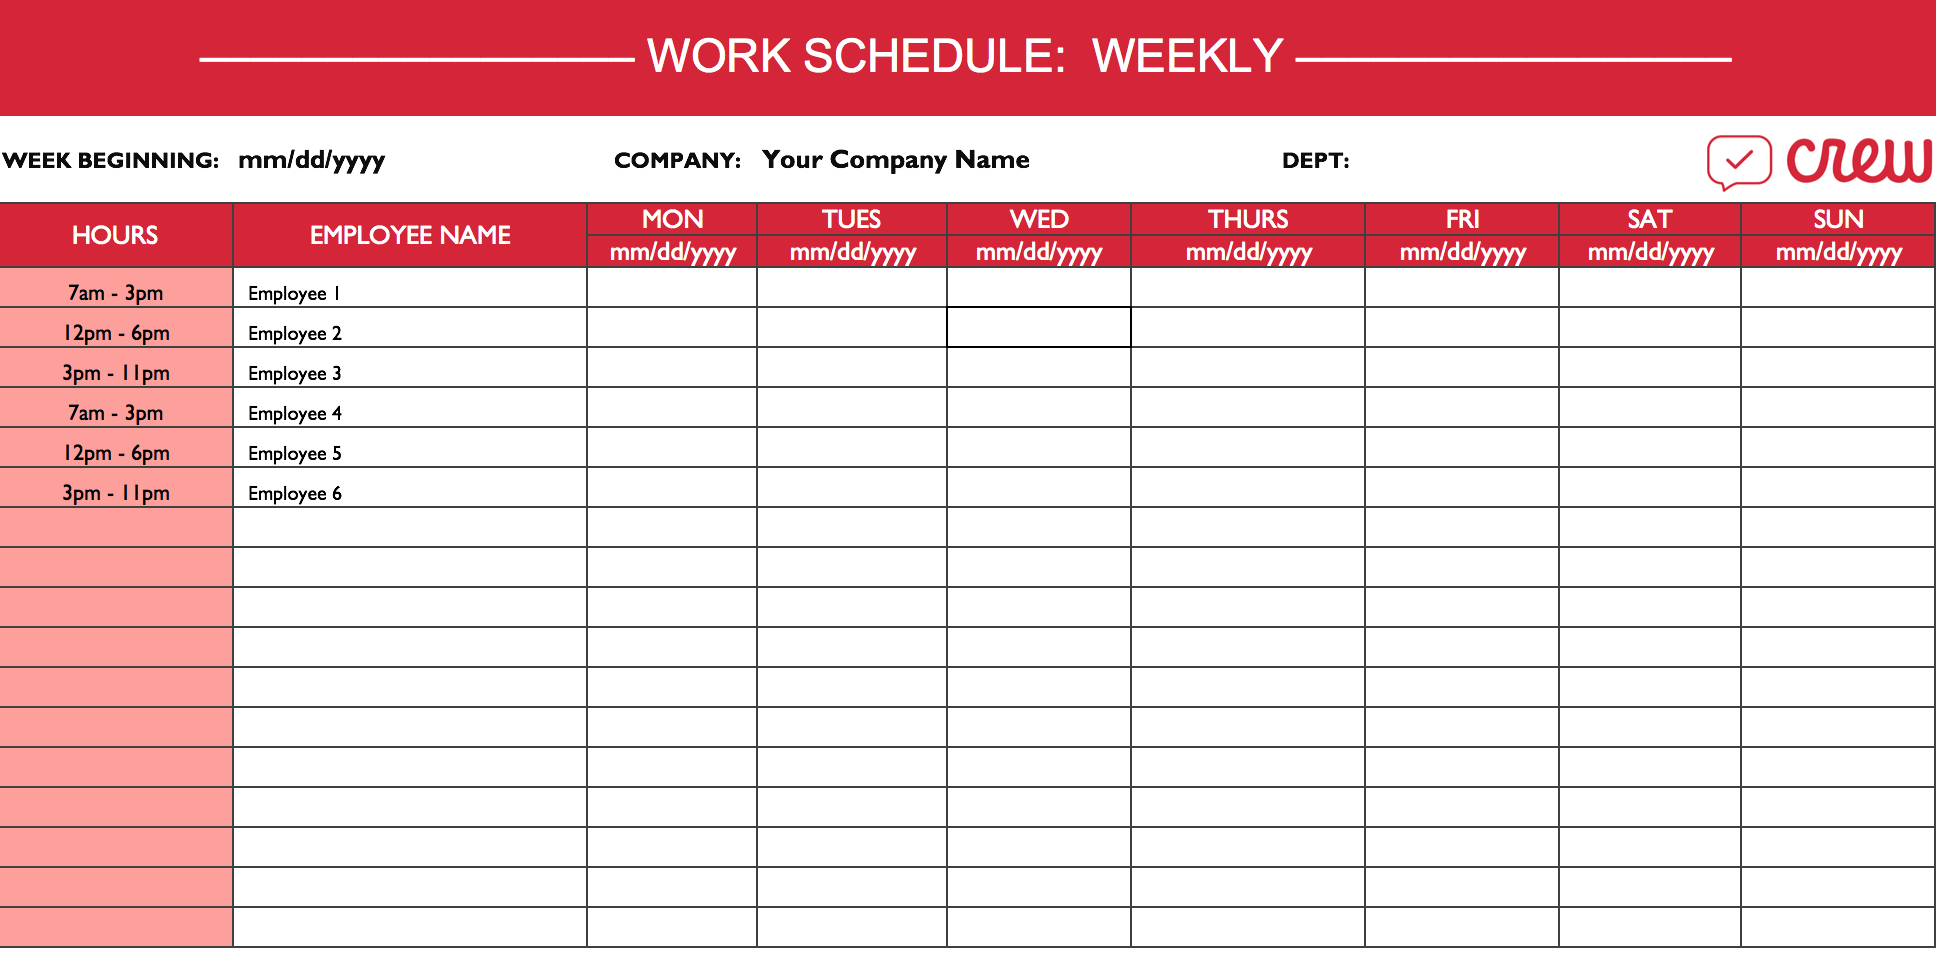 Sample Staff Schedule Spreadsheet intended for Weekly Work 